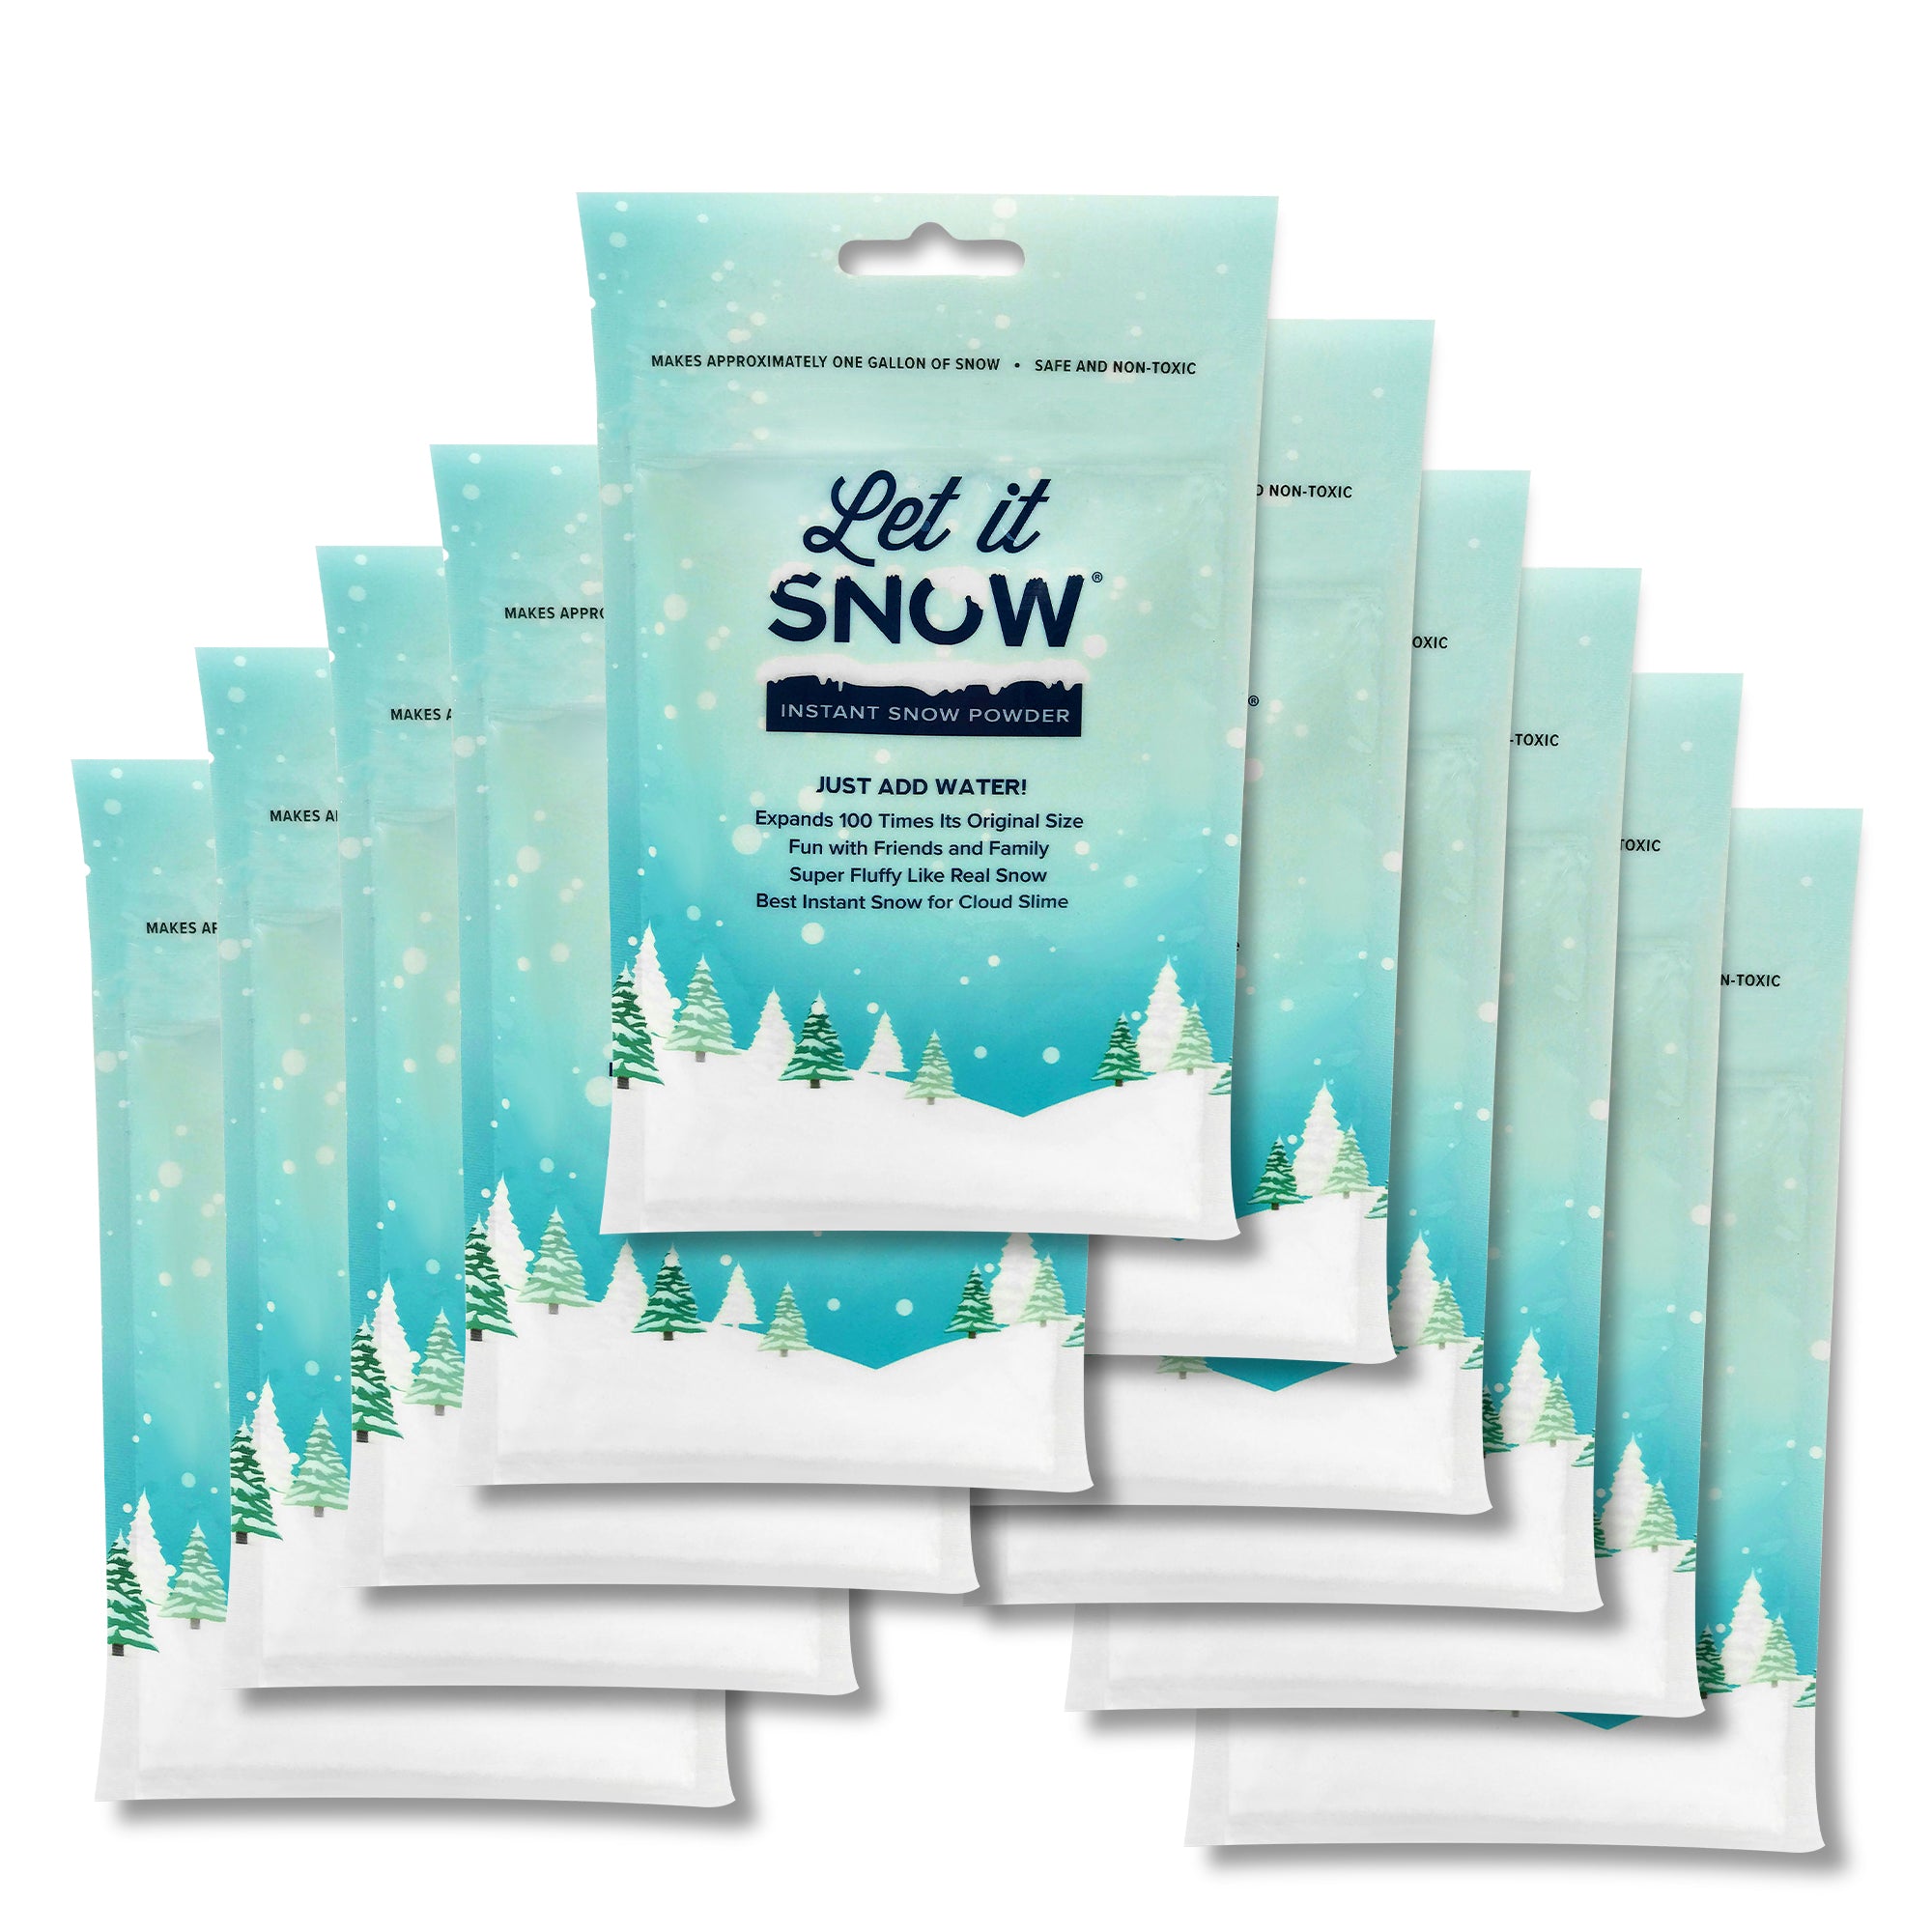 Let it Snow Instant Snow Powder For Cloud Slime and Holiday